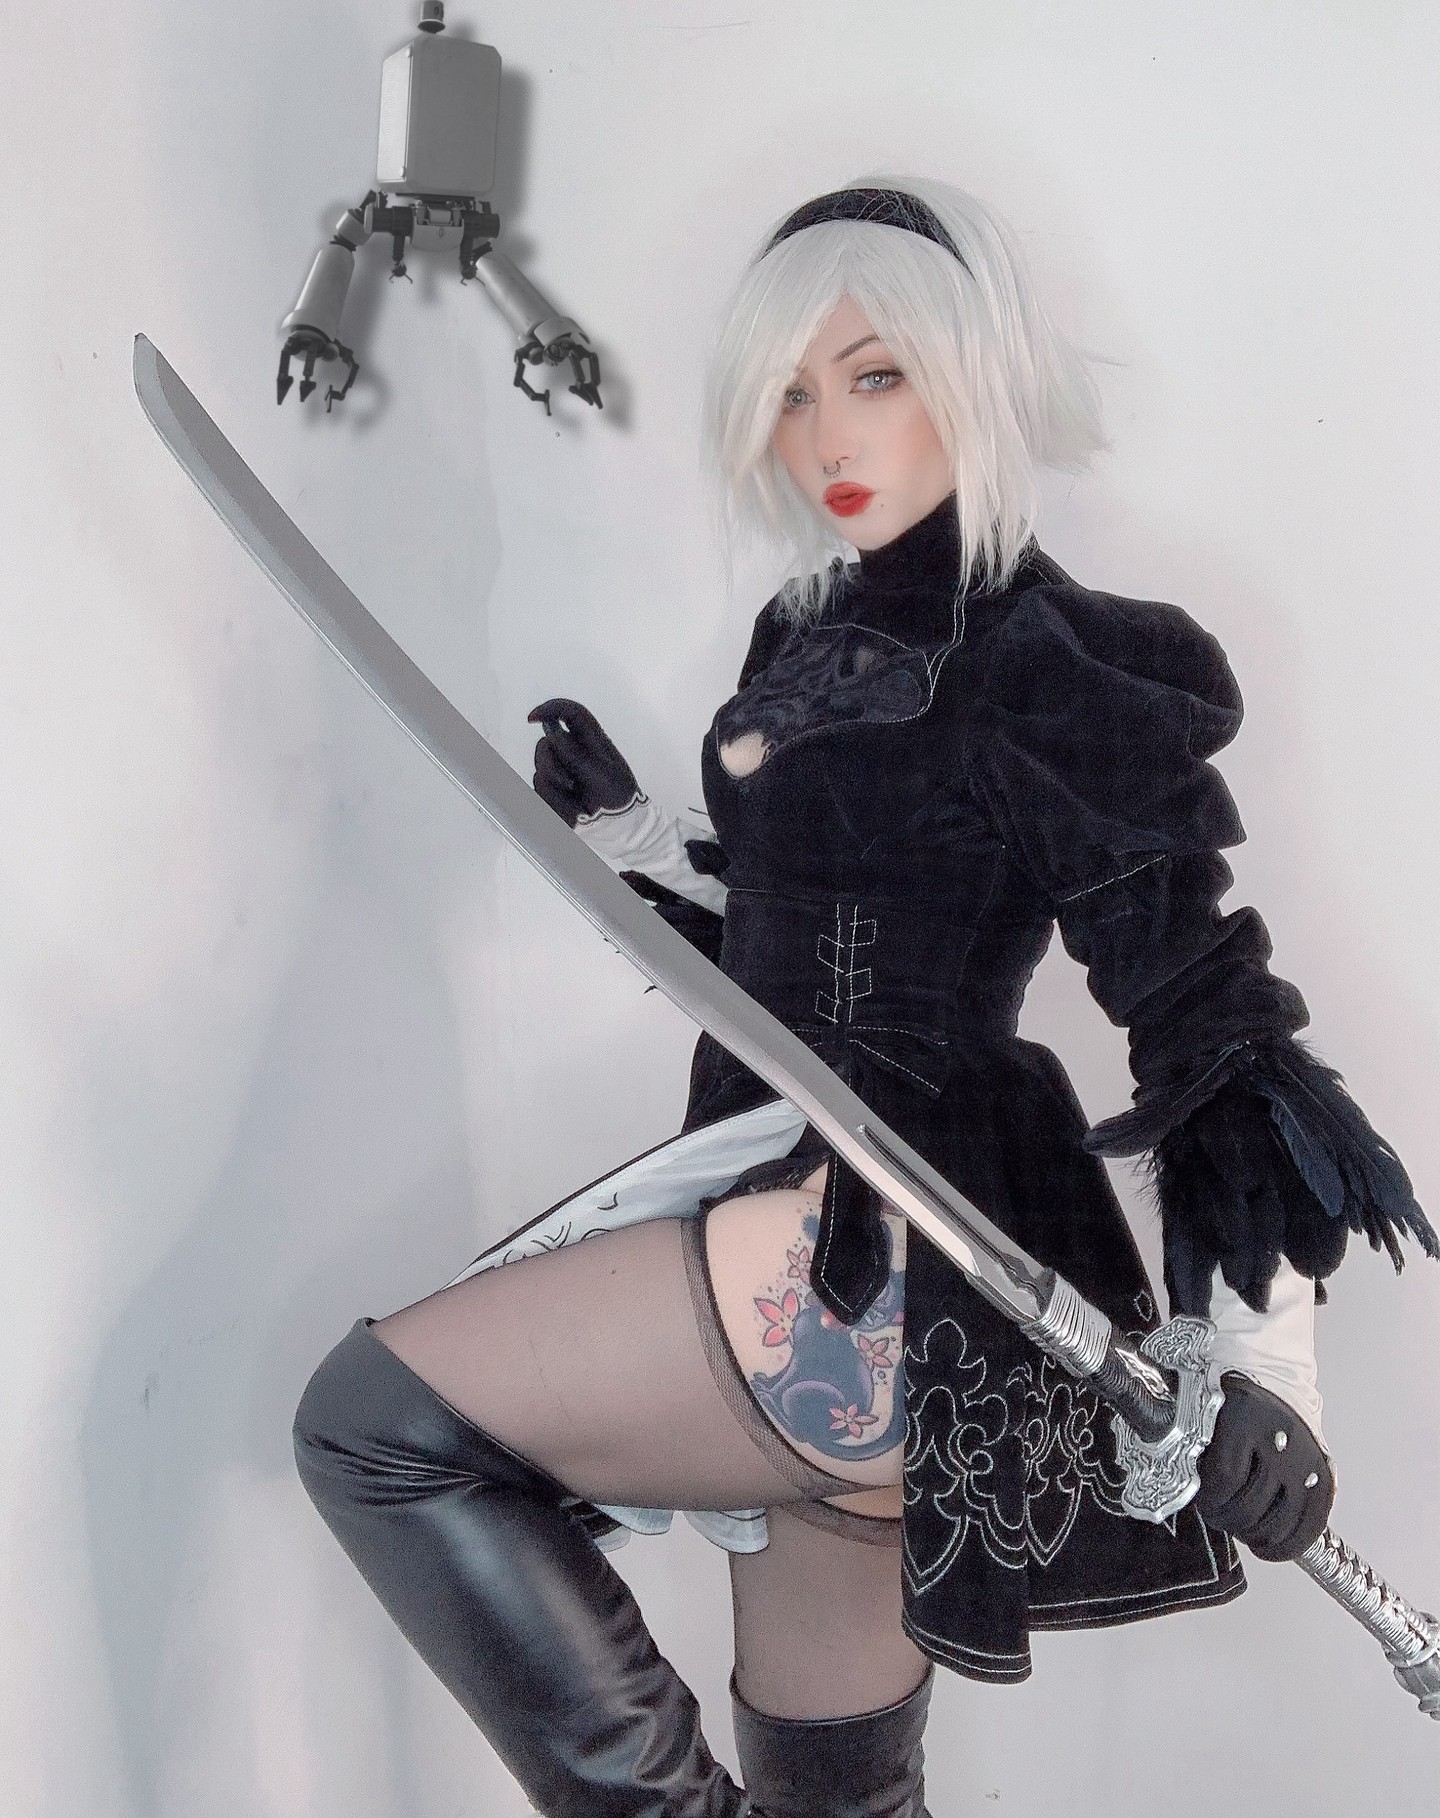 Hi! I'm so proud of this photo, i hope you liked it! Don't hesitate to like, comment, and share my work, it's free and help me a lot <3

#2b #2bcosplay #2bcosplaynierautomata #nierautomata #nierautomatacosplay #nierautomata2b #cosplayphotography #cosplayphotoshoot #cosplayworld